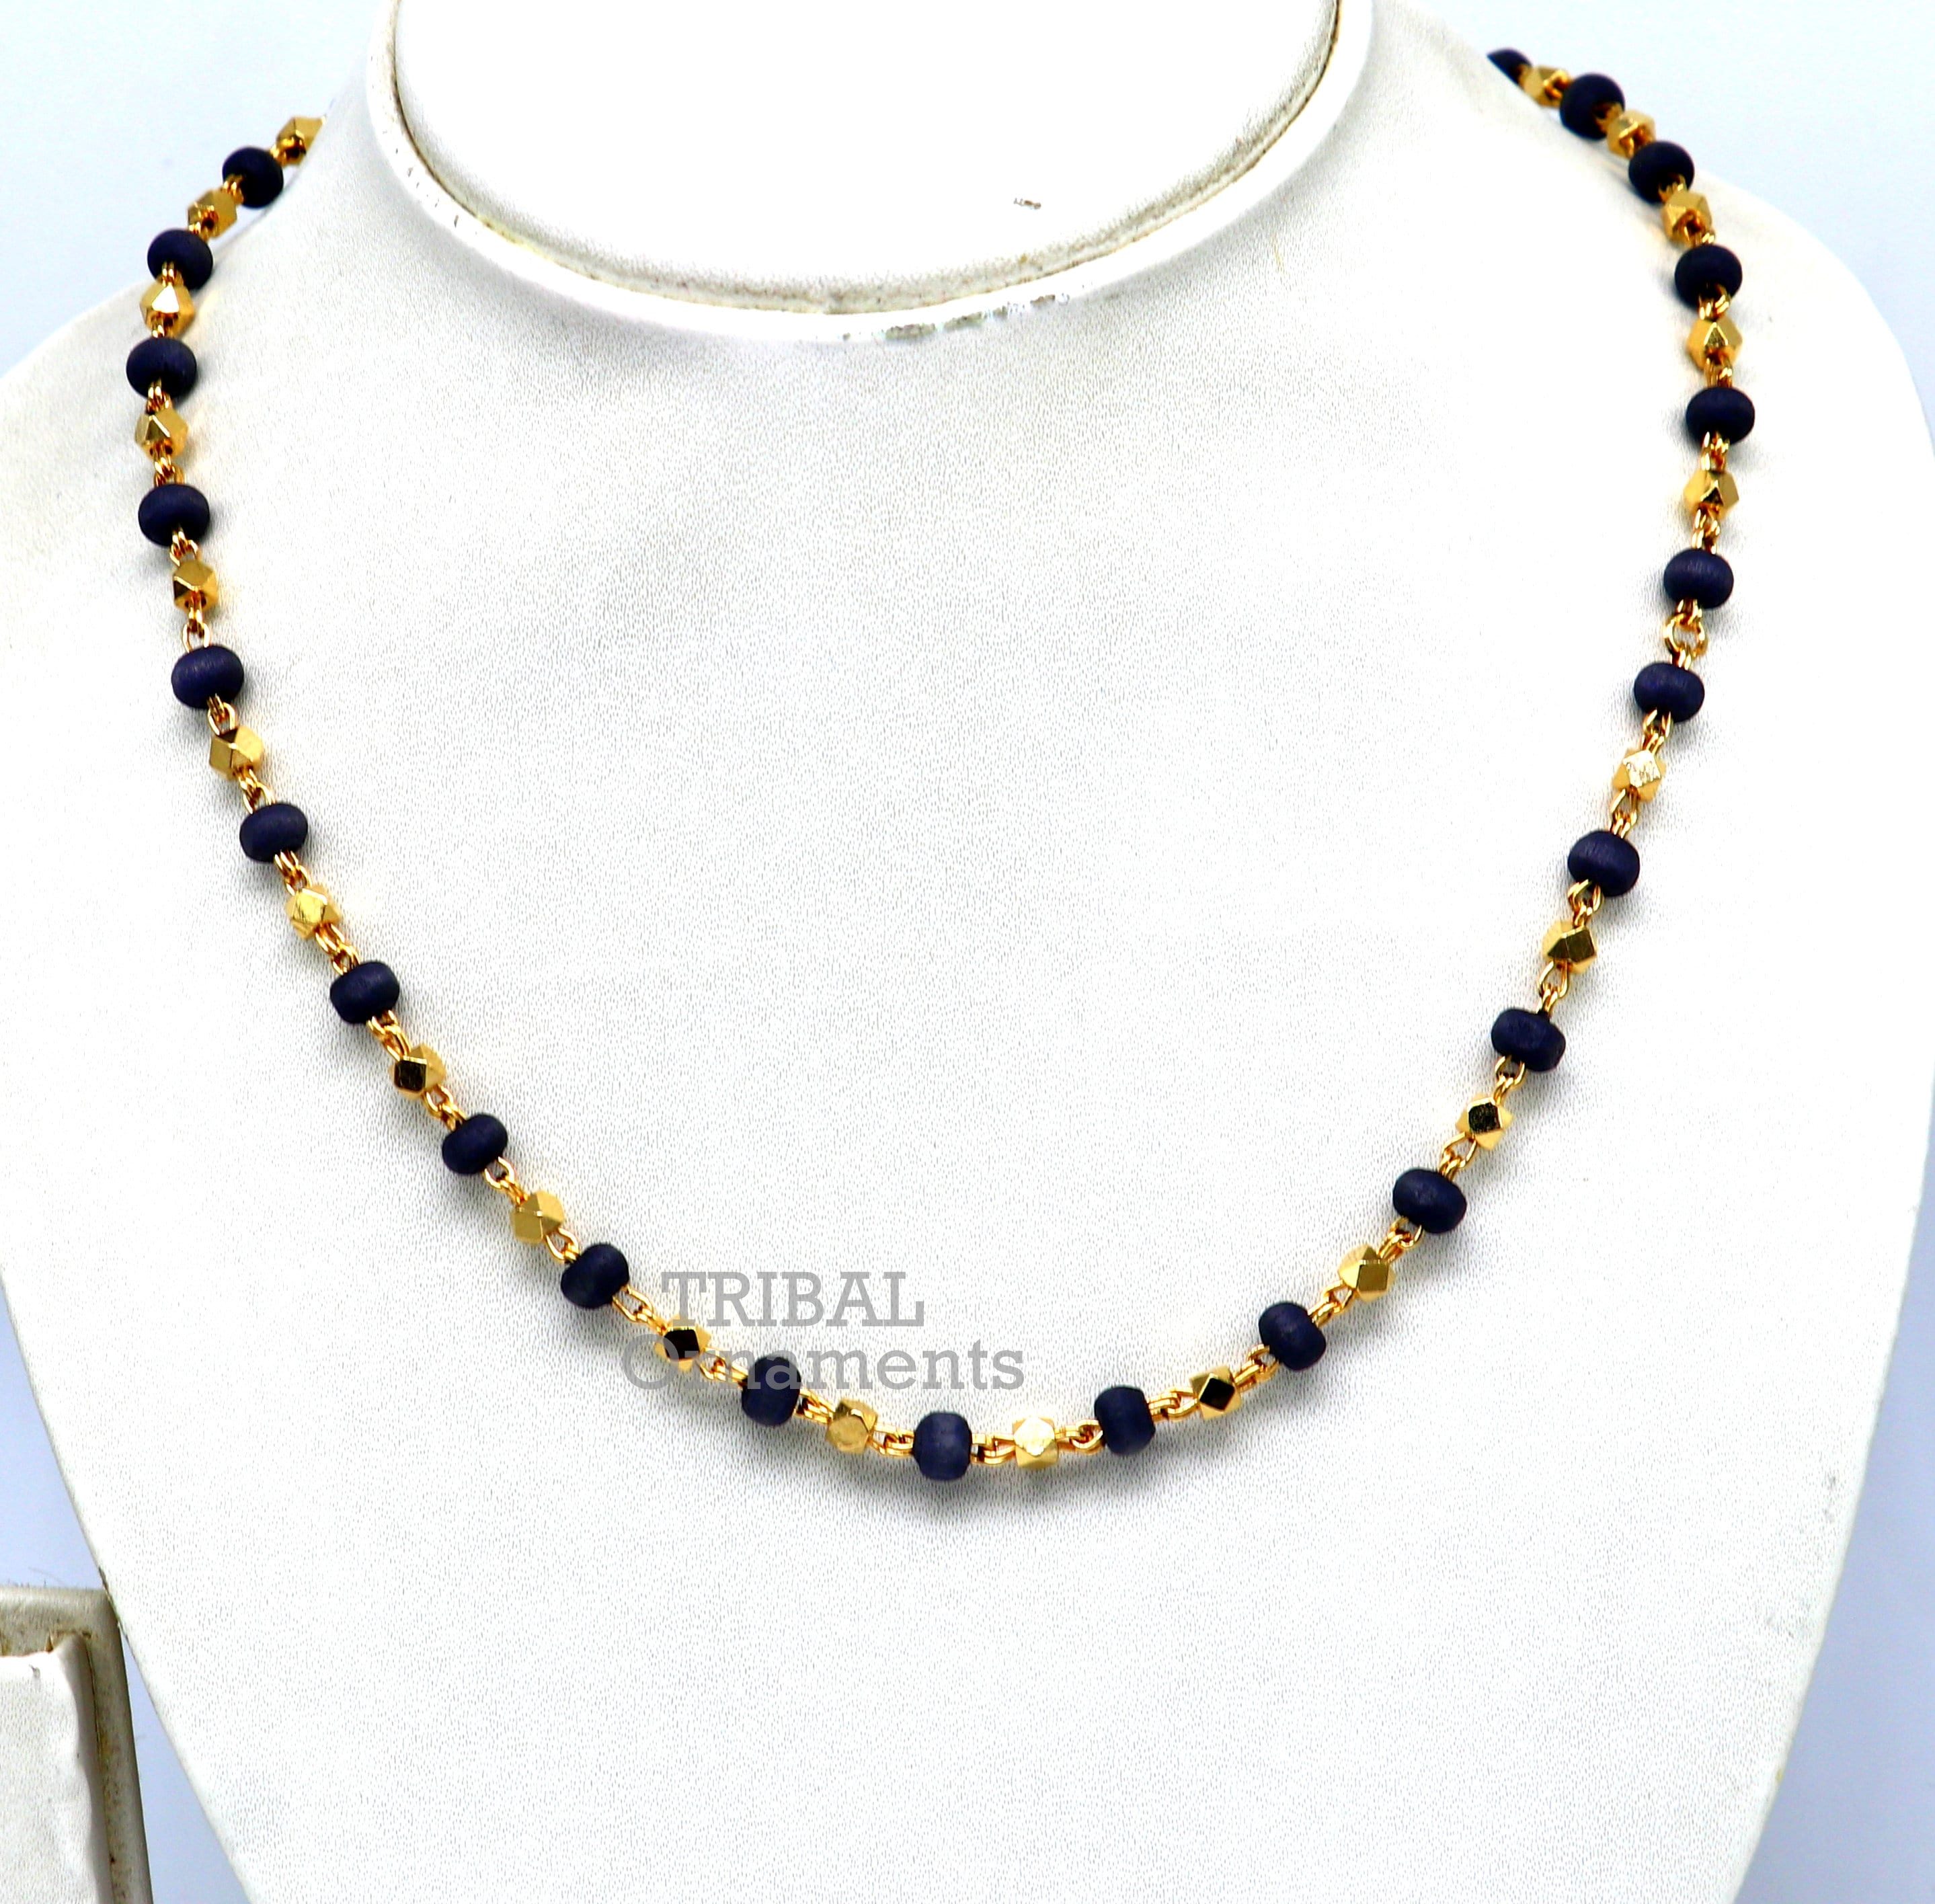 Brown Wooden Polished Beaded Necklace with Orange knotted Yarn for Women -  Wood Handmade Fashion Bead Jewelry - Walmart.com